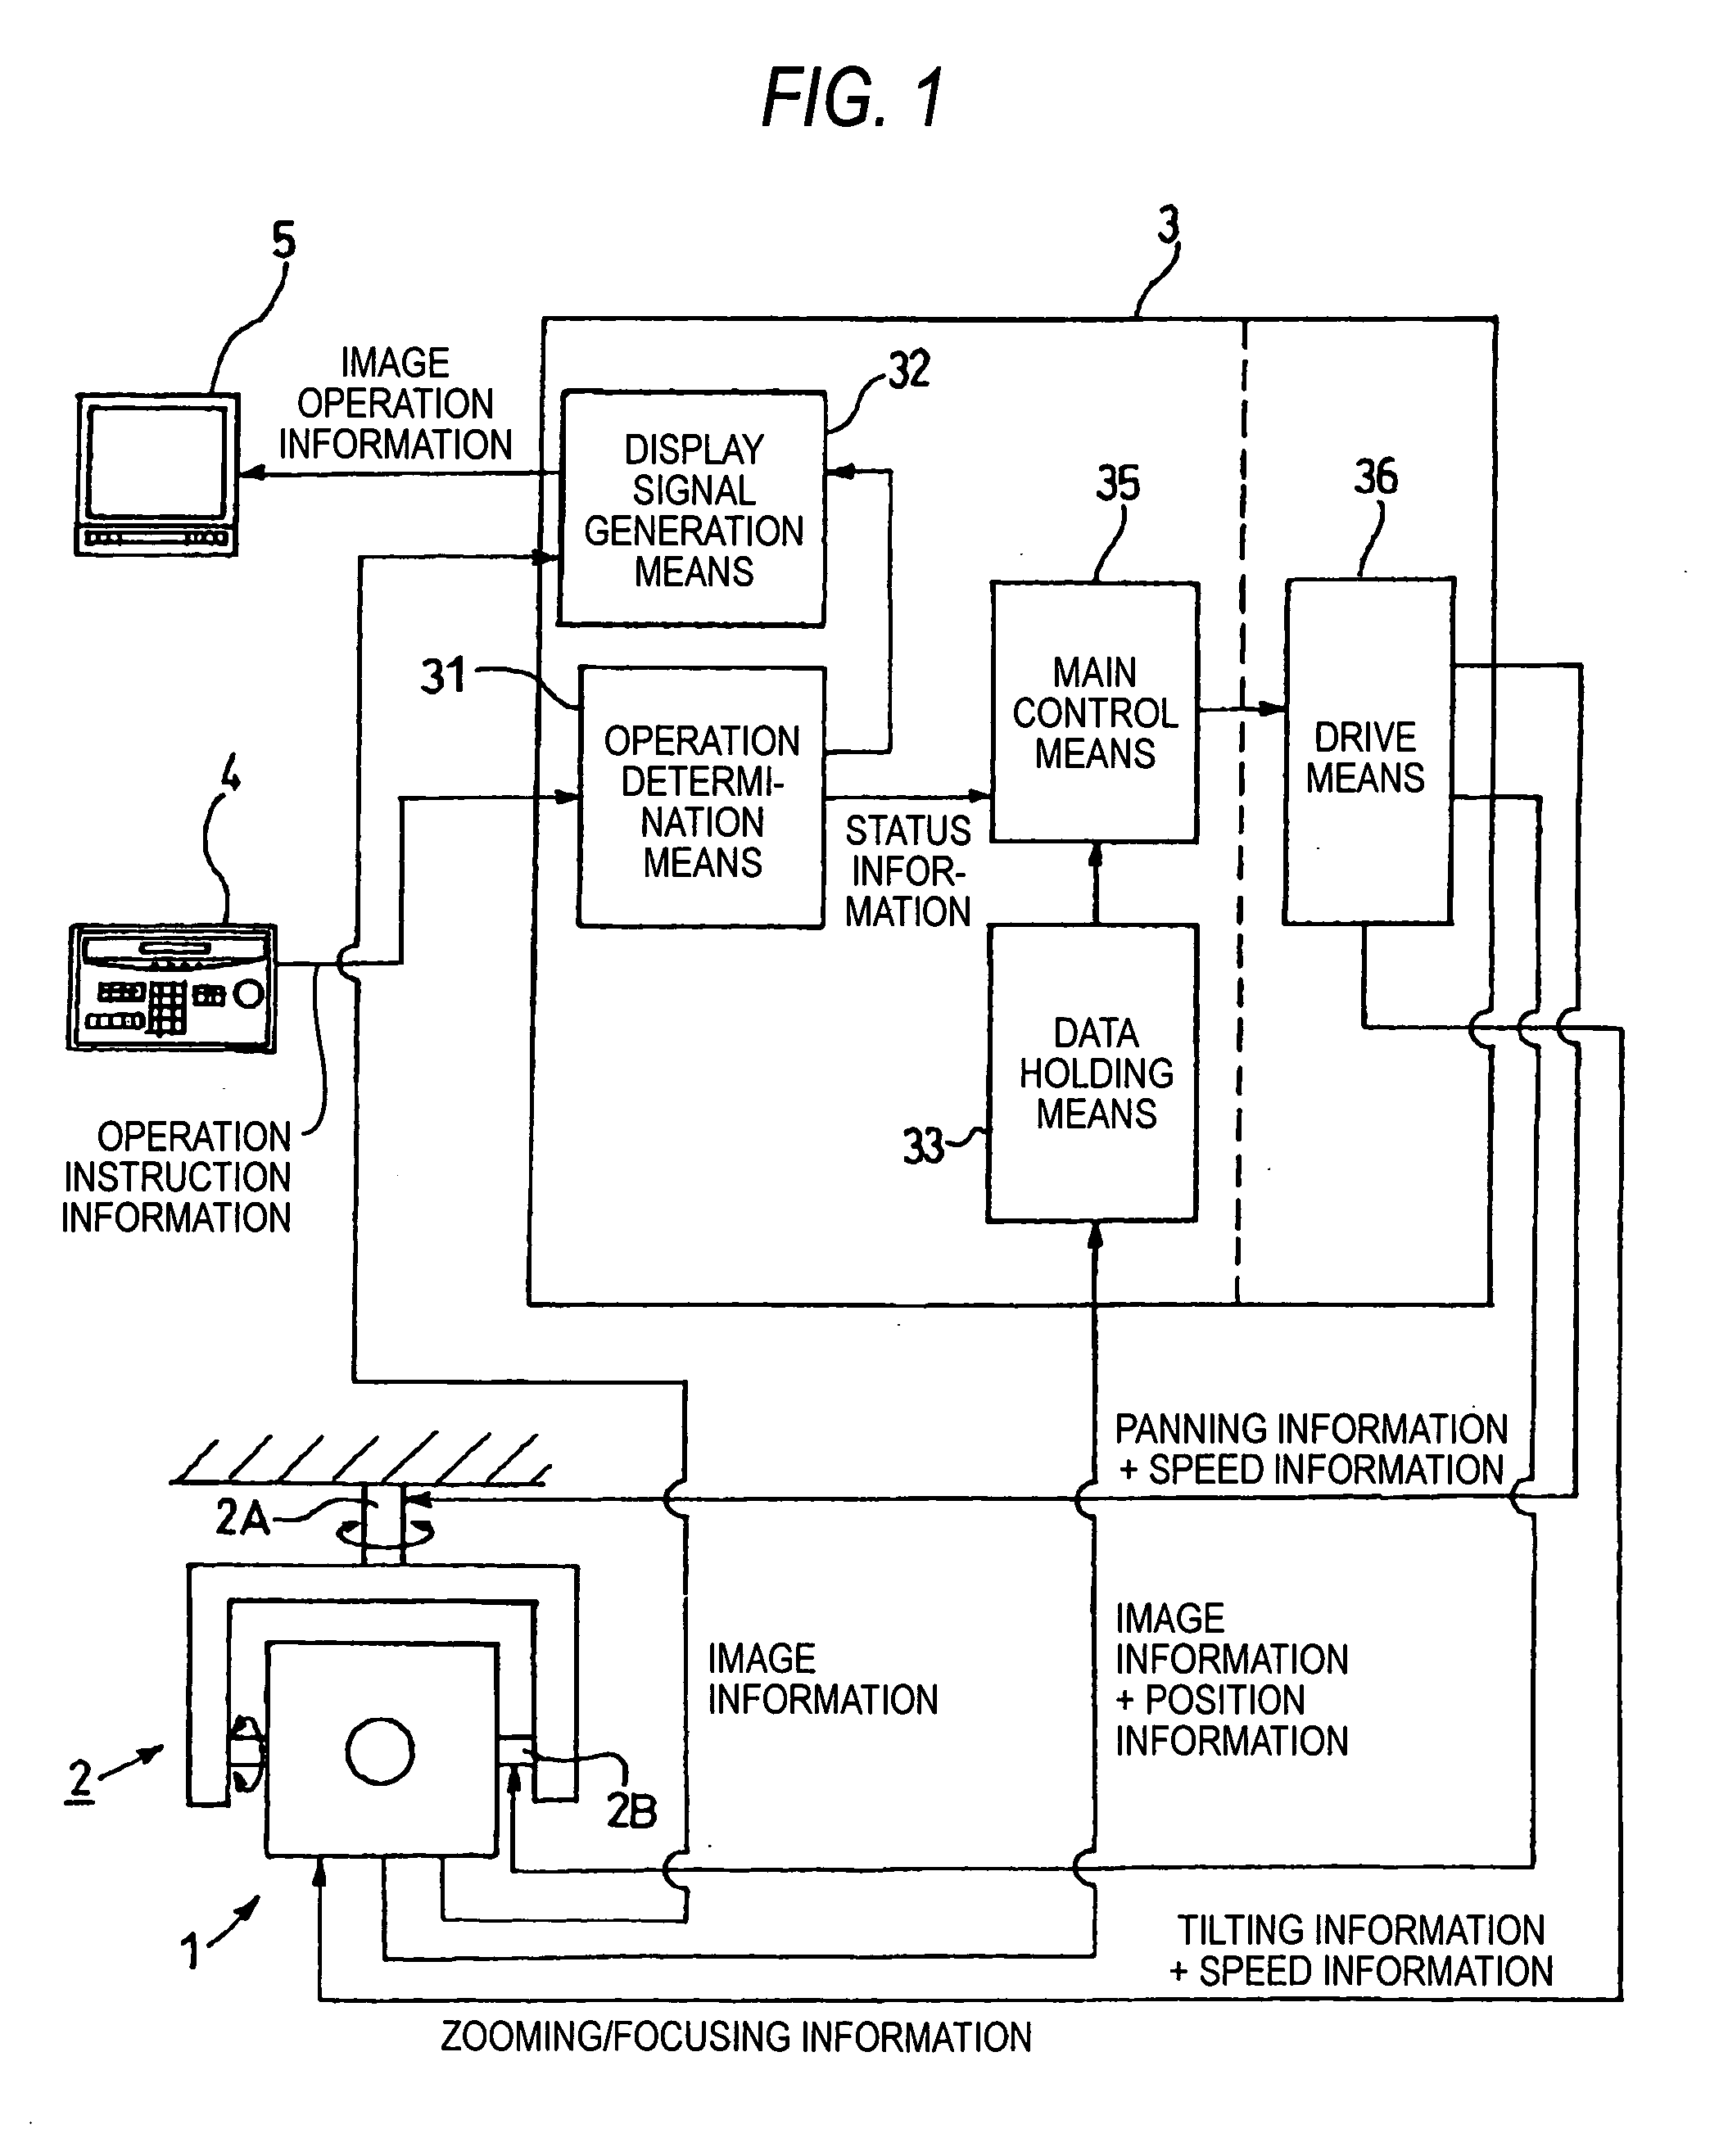 Camera apparatus, a camera system, and a method for controlling the camera system